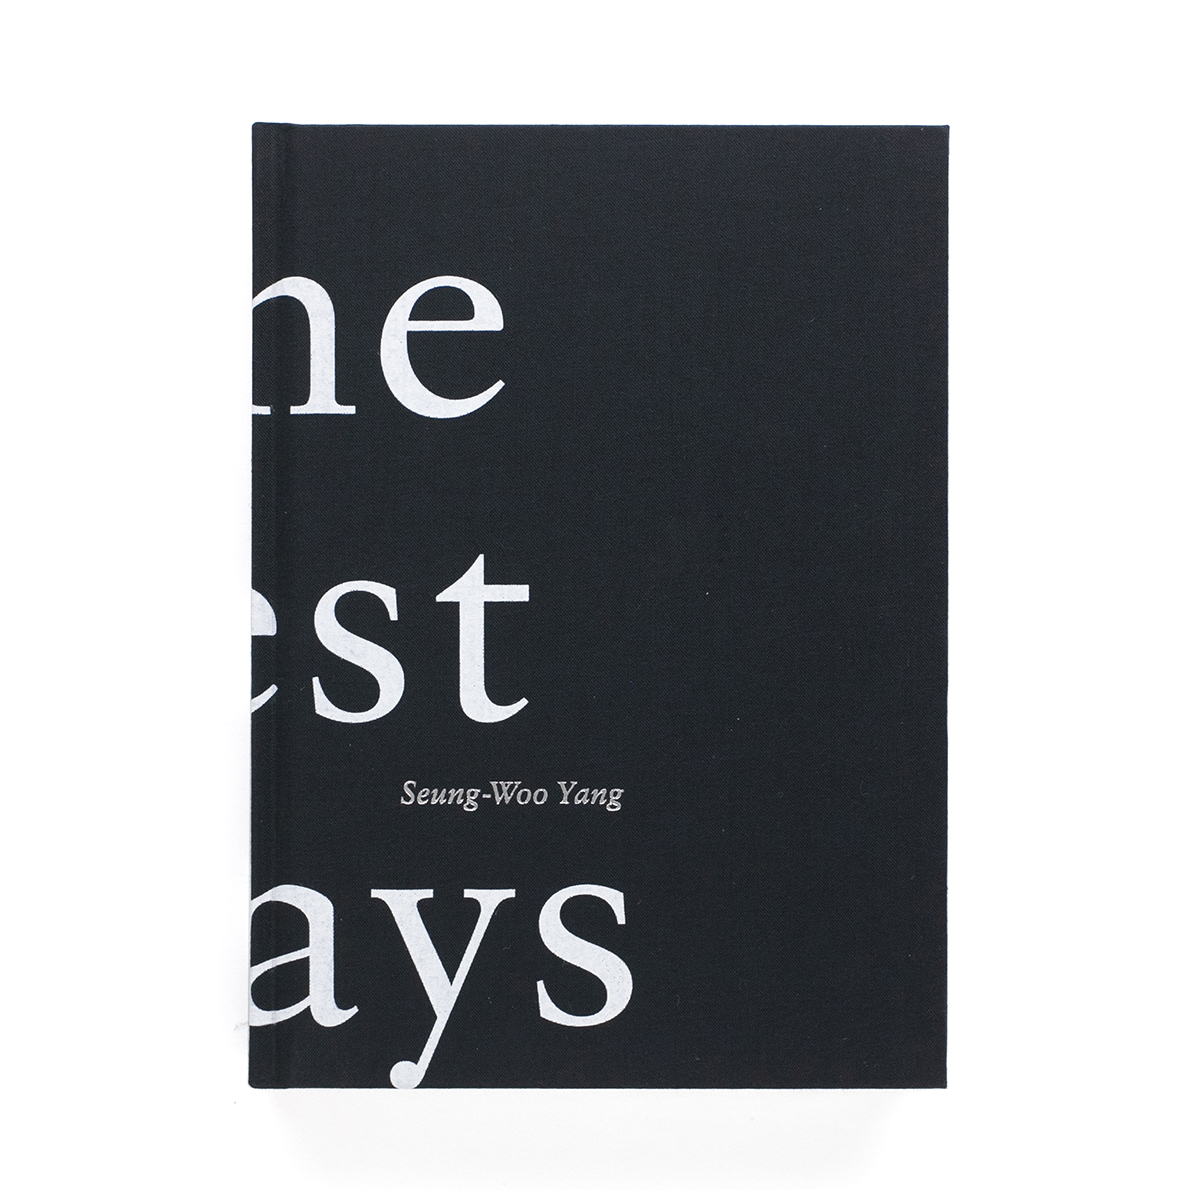 The Best Days (New Edition) - Yang Seung-Woo